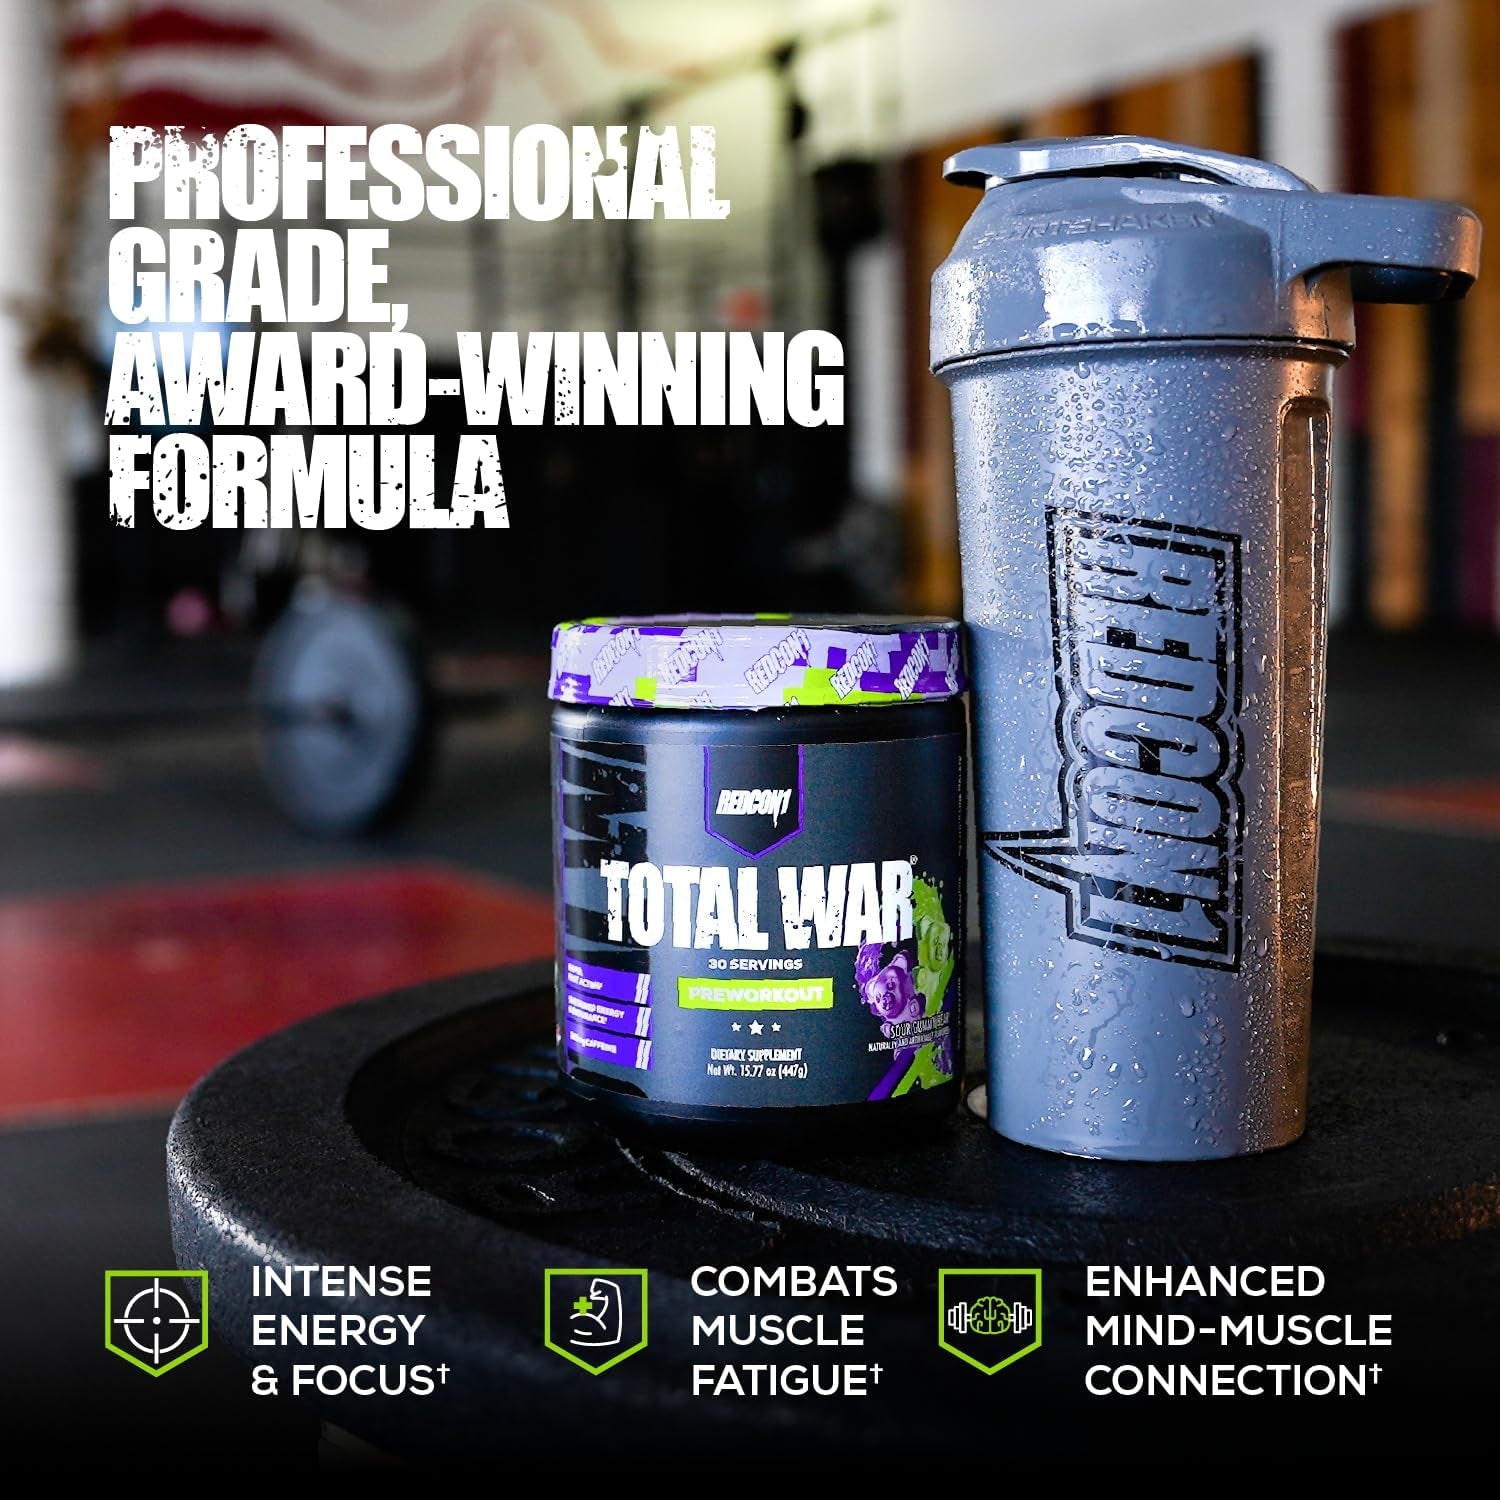 Total War Pre Workout - L Citrulline, Malic Acid, Green Tea Leaf Extract for Pump Boosting Pre Workout for Women & Men - 3.2G Beta Alanine to Reduce Exhaustion, Watermelon 30 Servings